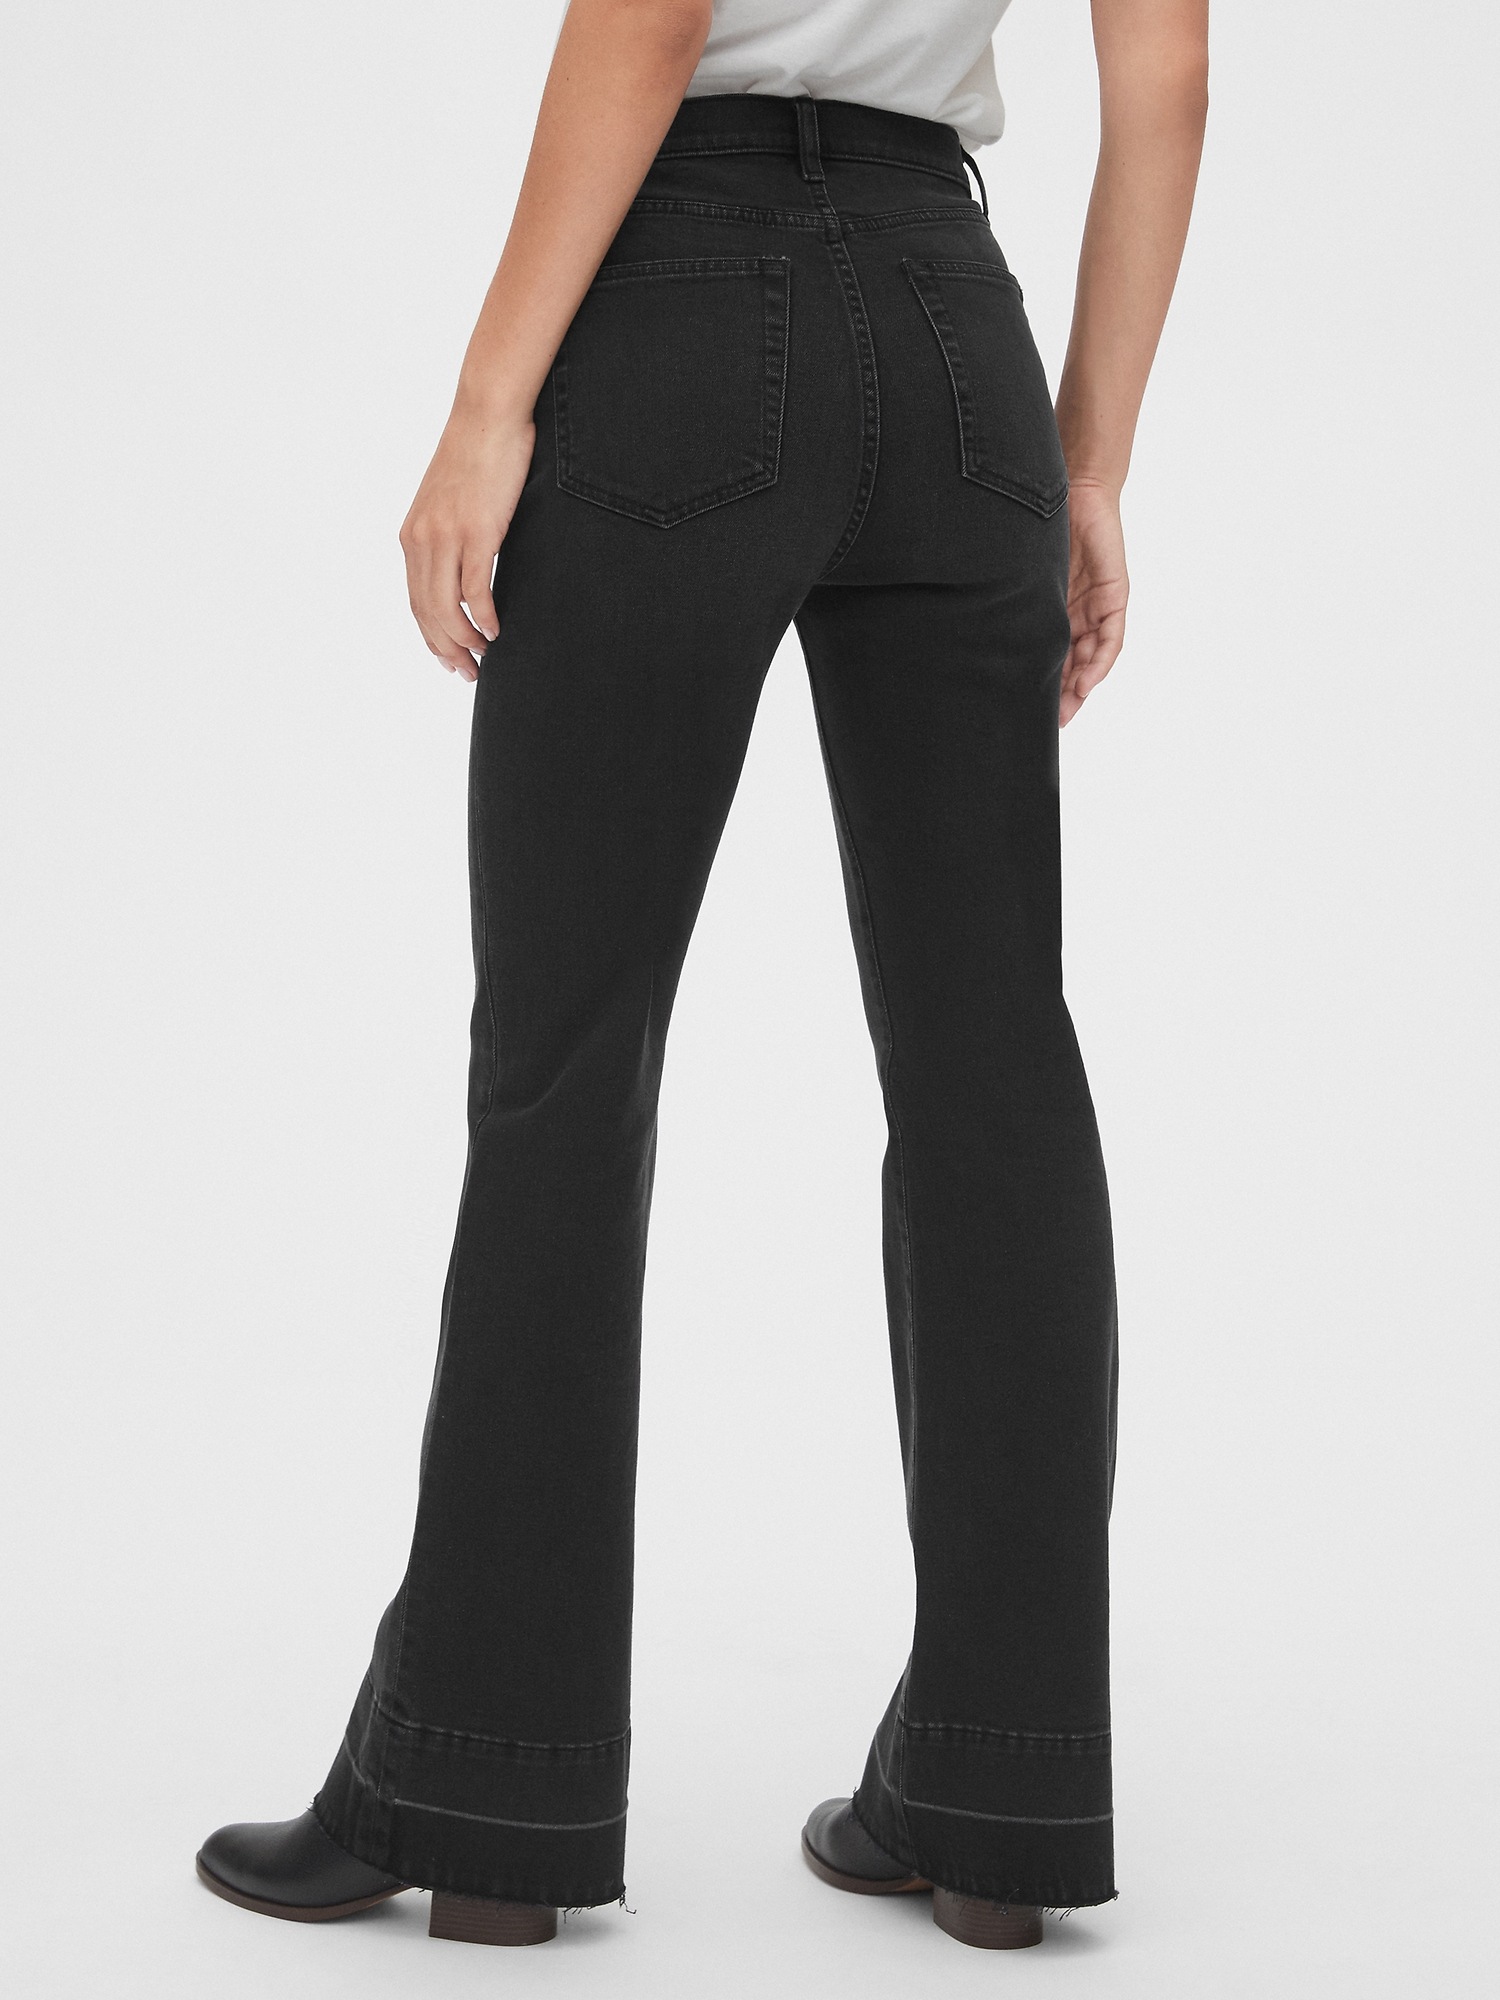 Risen Button Fly Black Flare Jeans